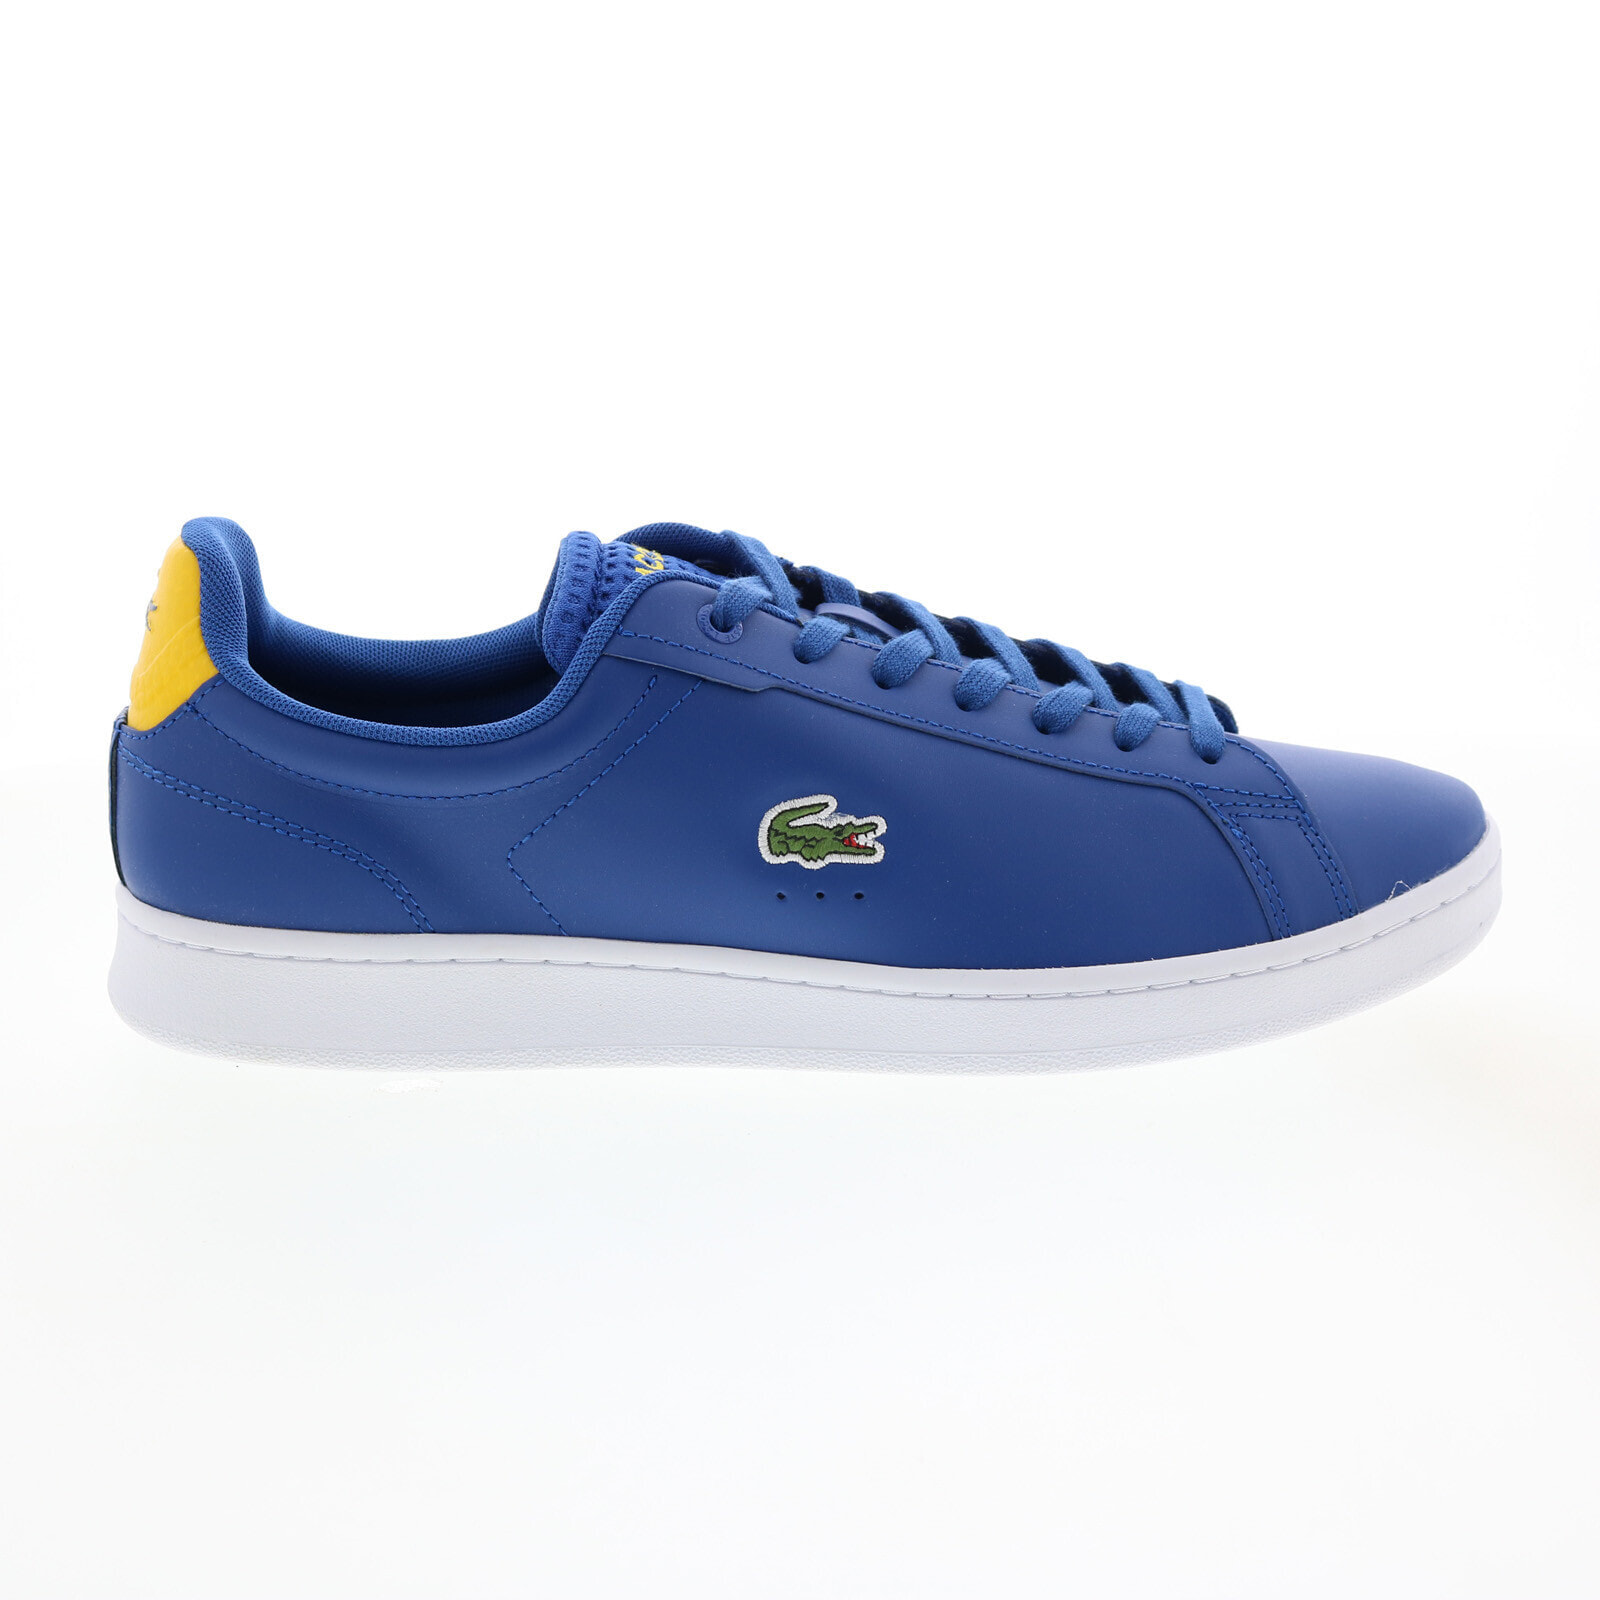 Lacoste Carnaby Pro 123 4 7-45SMA0063121 Mens Blue Lifestyle Sneakers Shoes